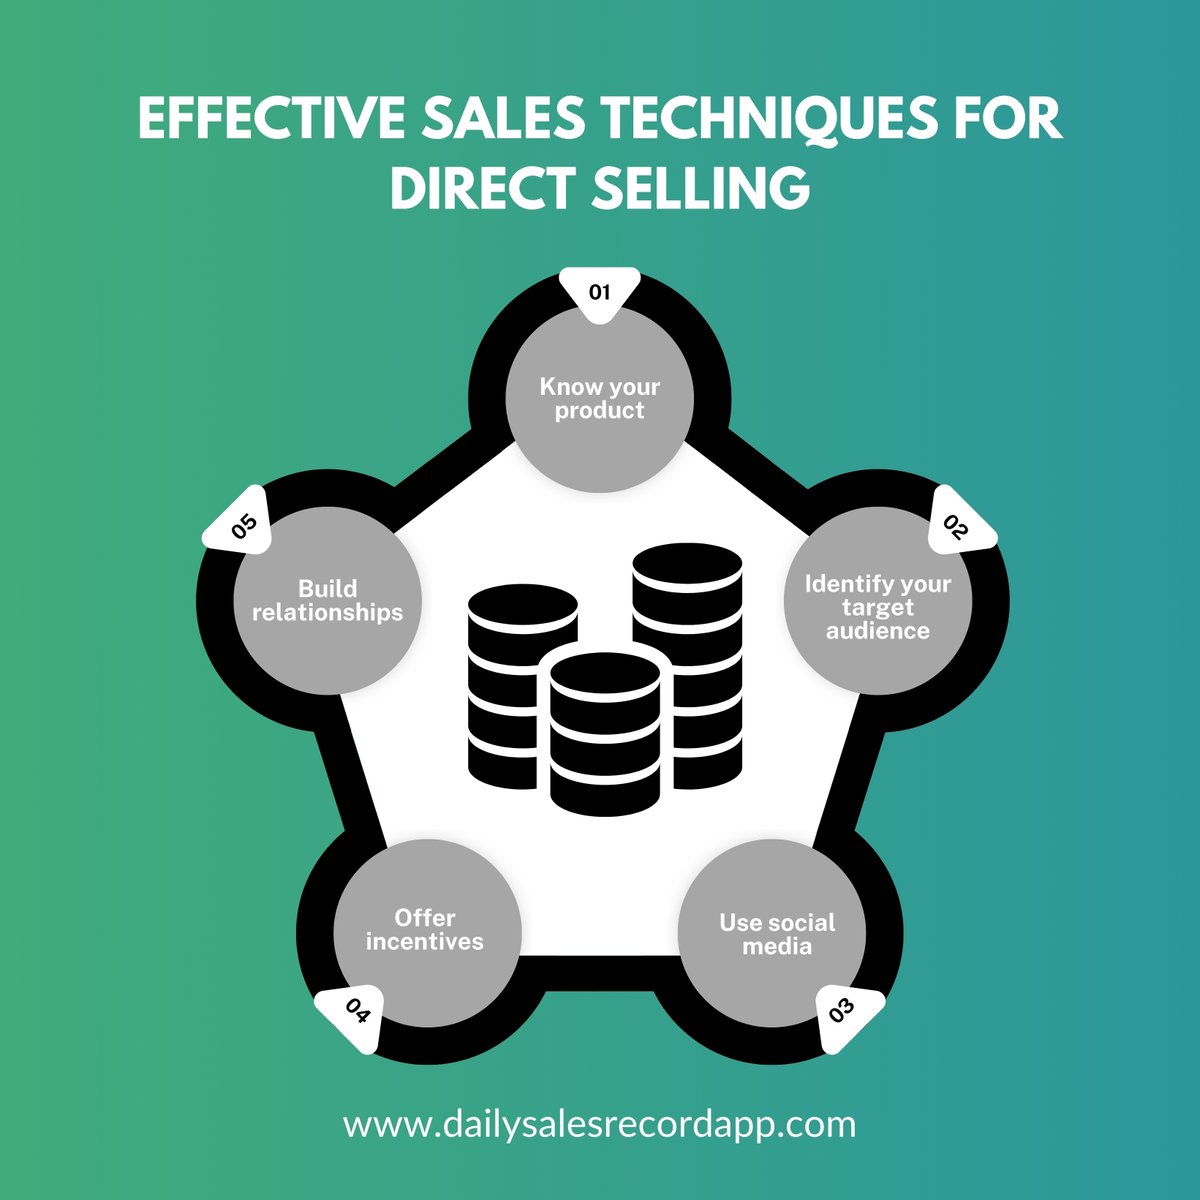 Direct selling is an art that requires a combination of effective sales techniques to succeed. It involves selling products or services directly to consumers without the need for middlemen.

#directselling
#salestechniques
#relationshipbuilding
#personalizedattention
#salestips